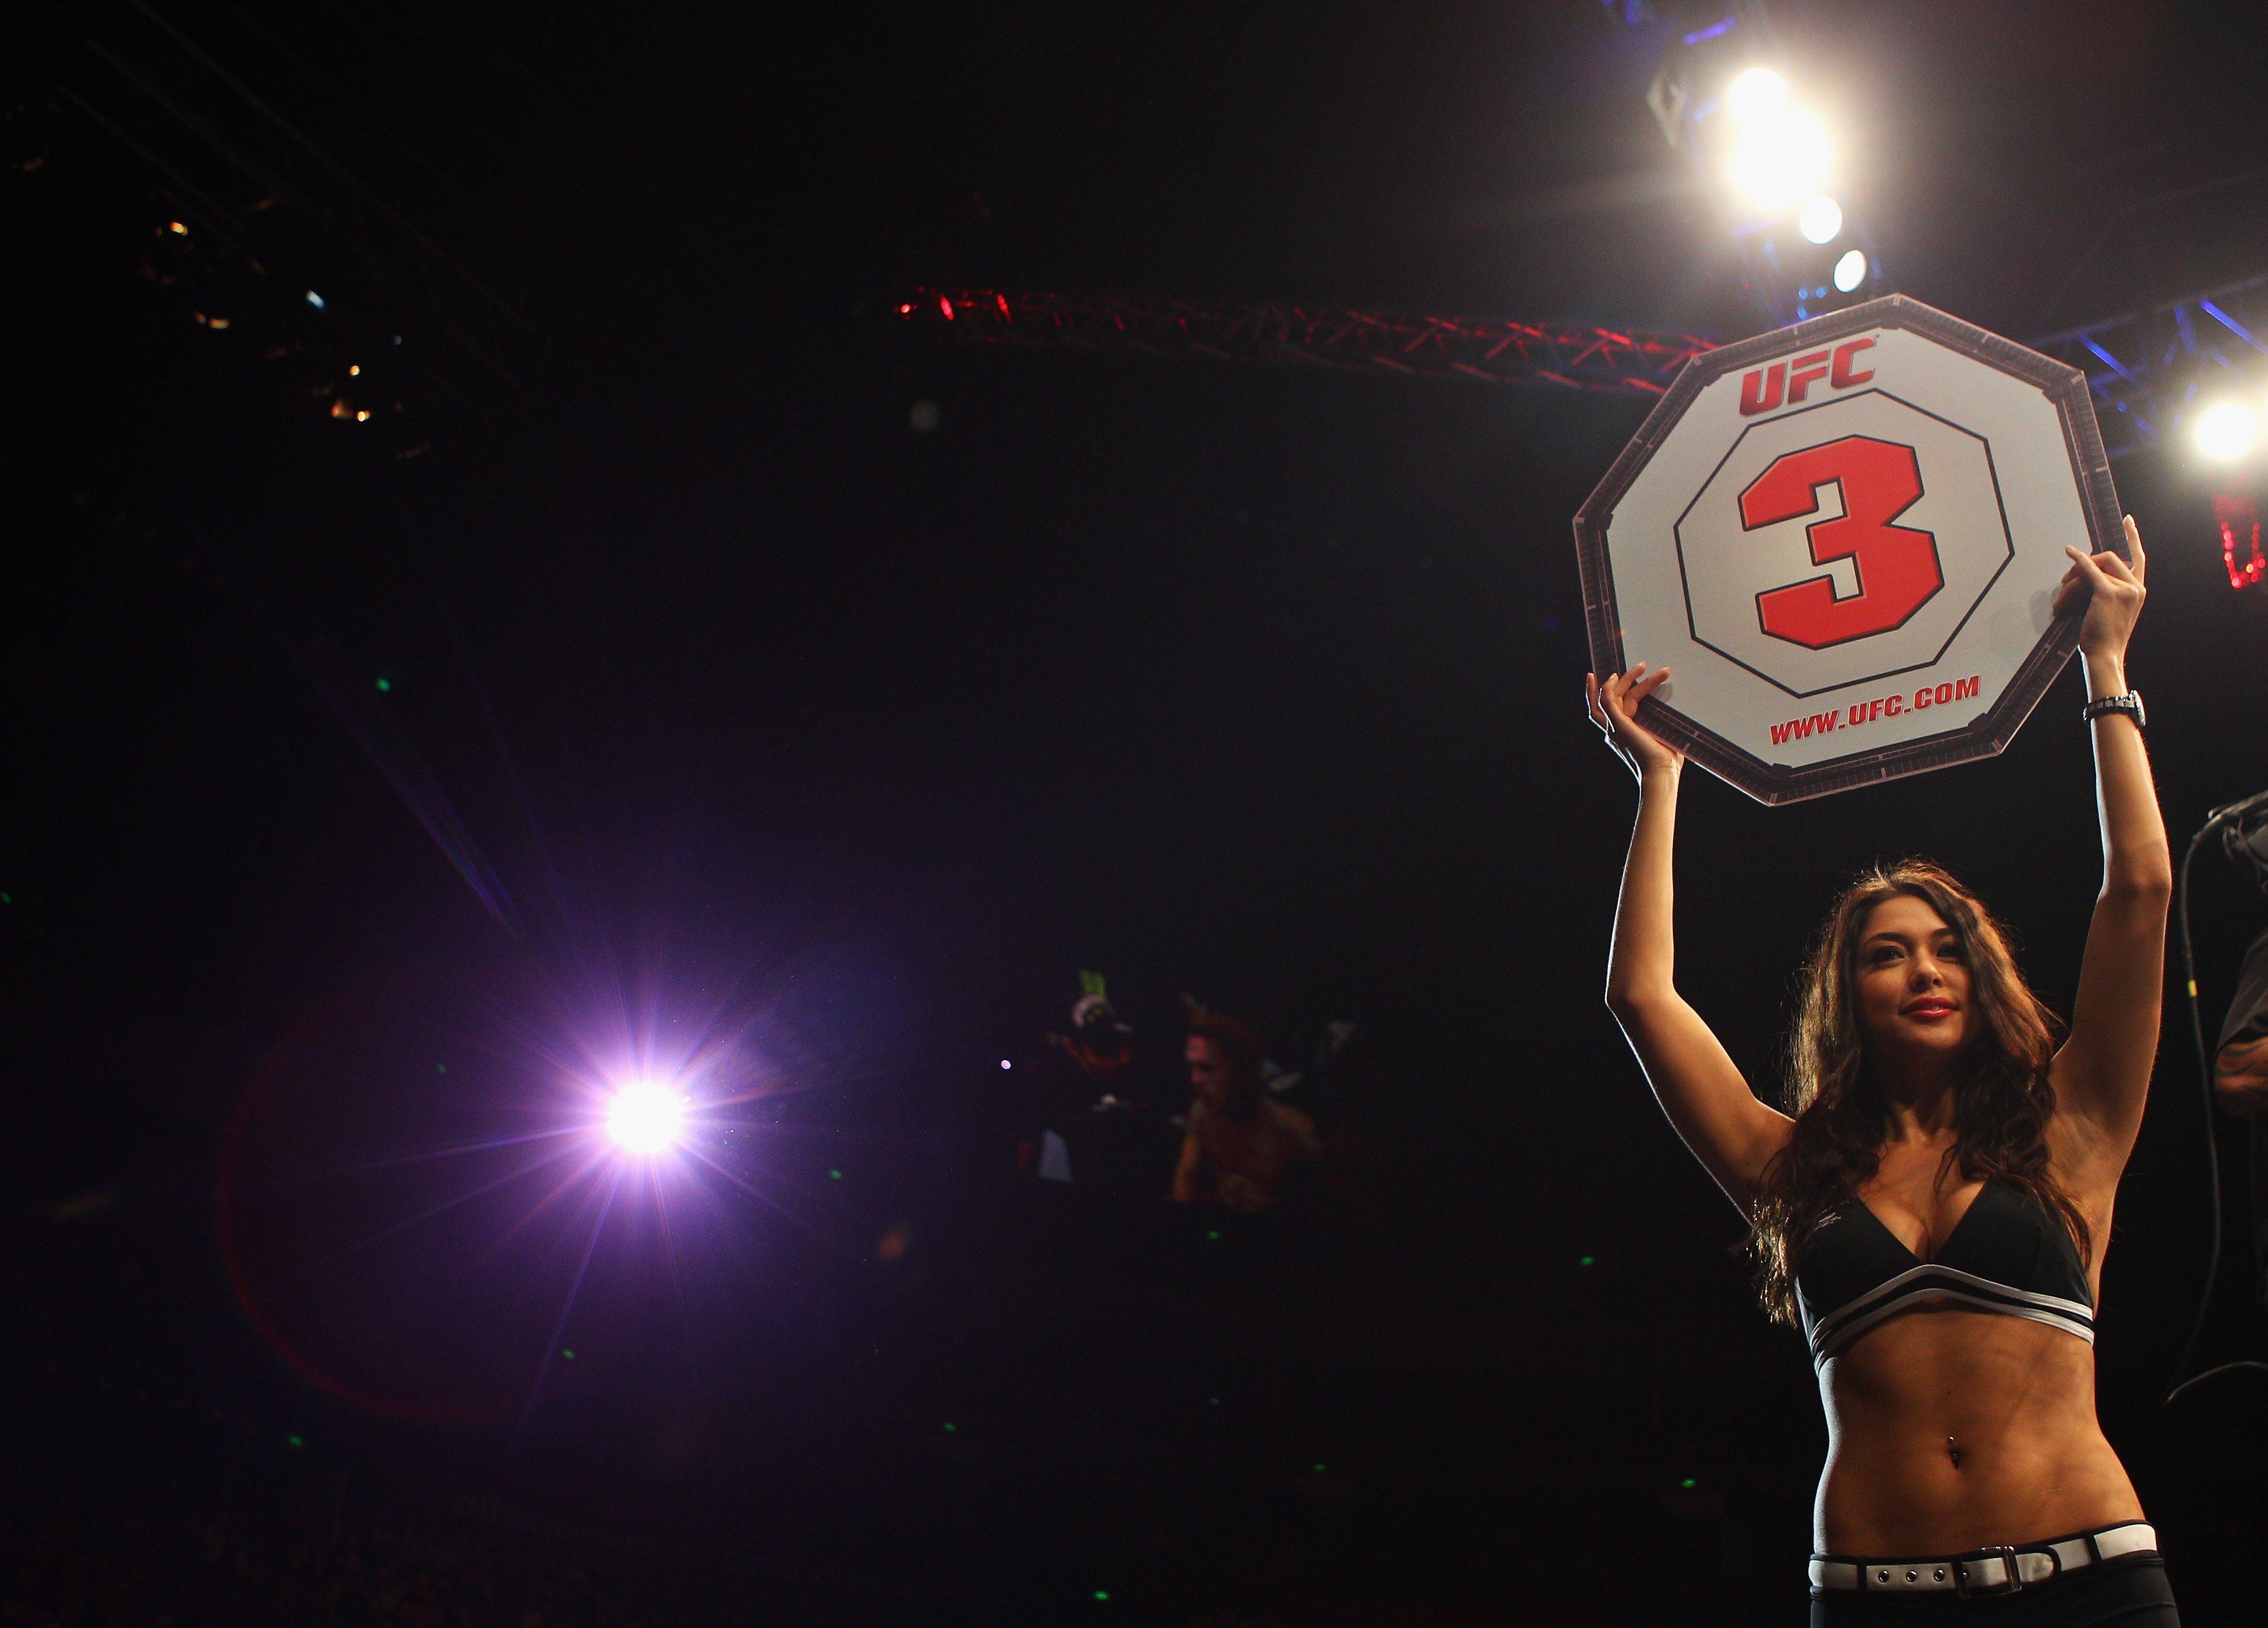 UFC ring girl Arianny Celeste responds to claims she earns more than fighters